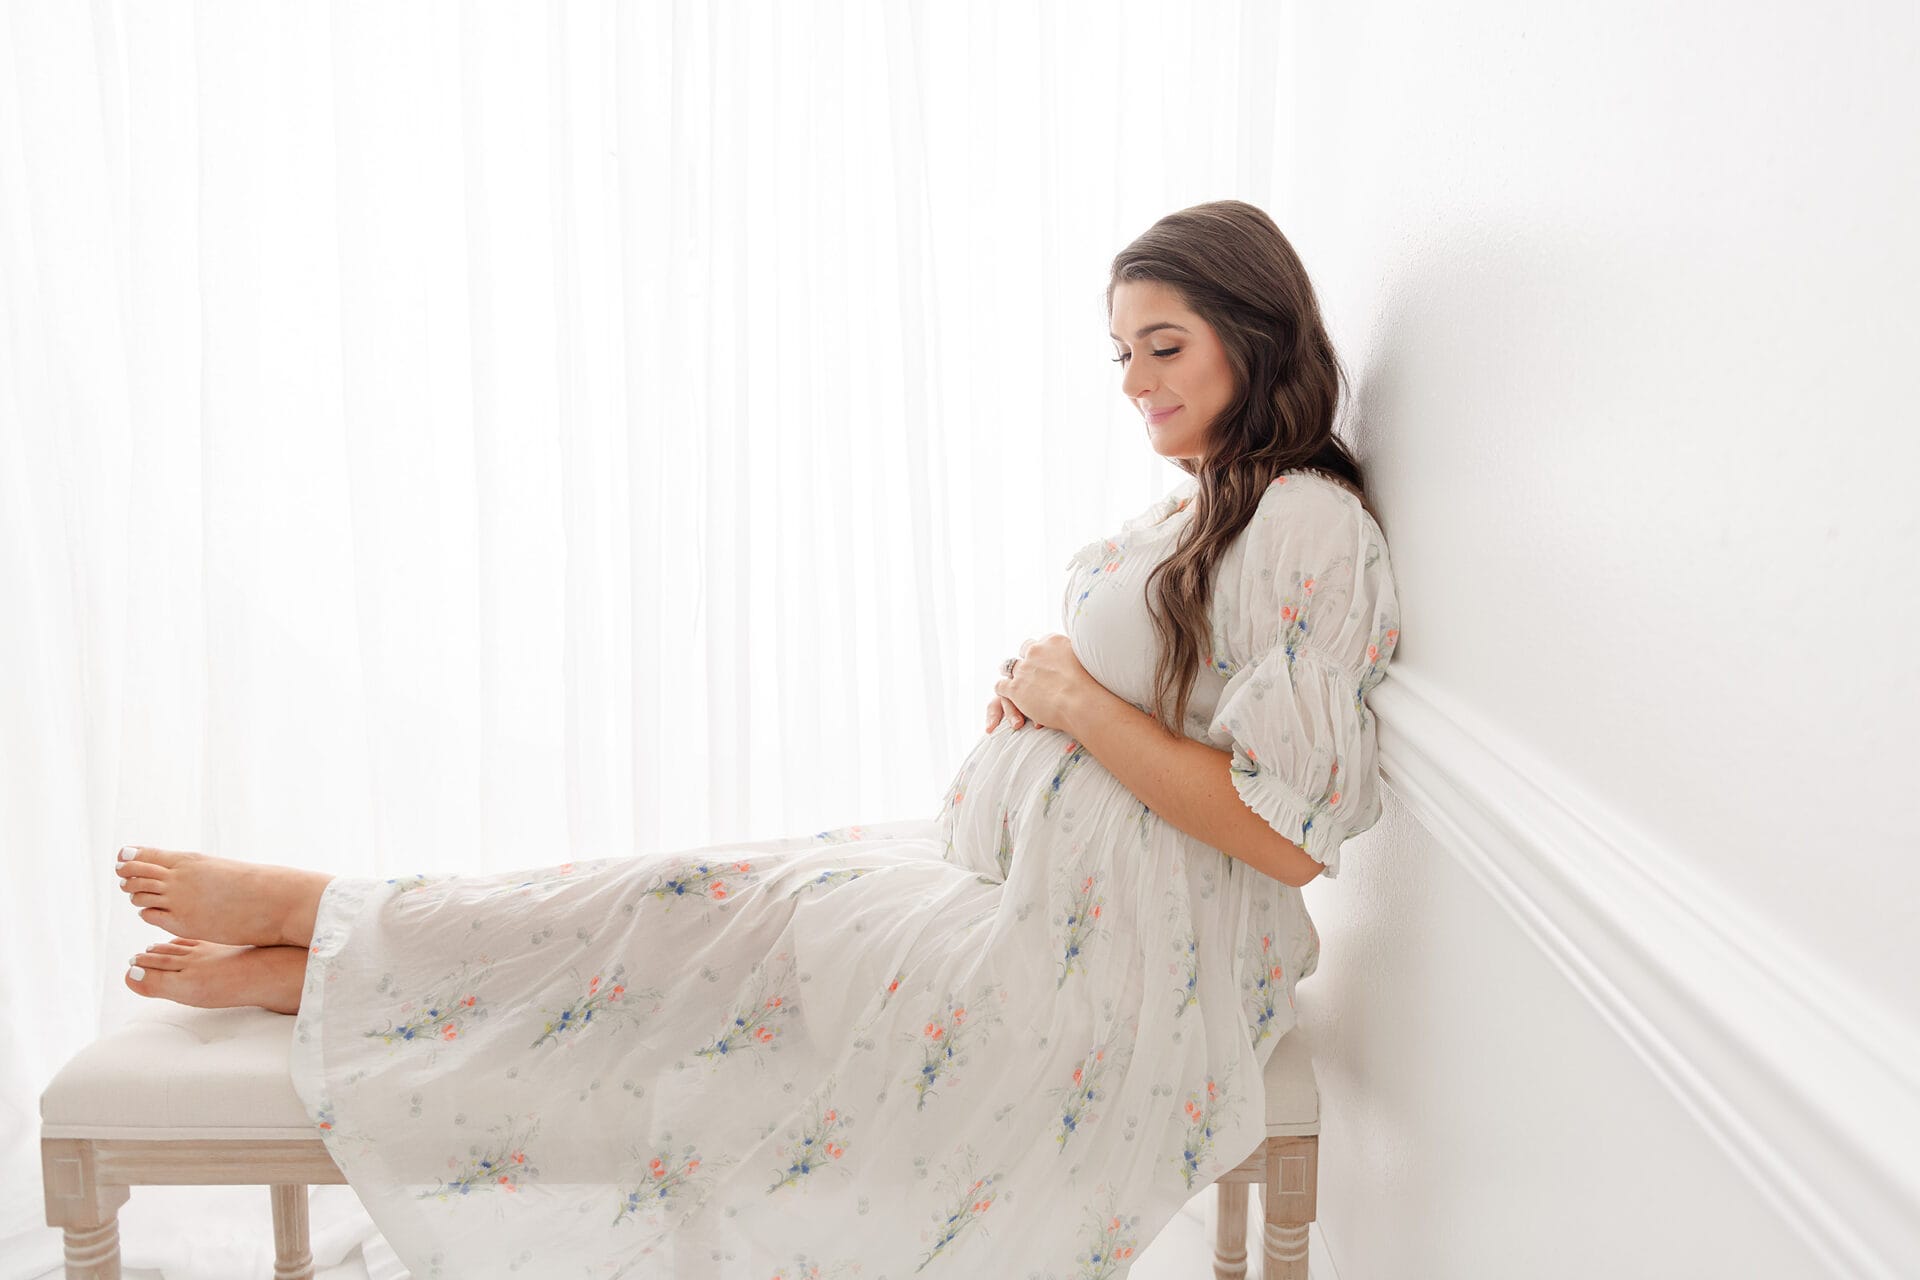 Pregnant woman sitting on a bench in a white room.